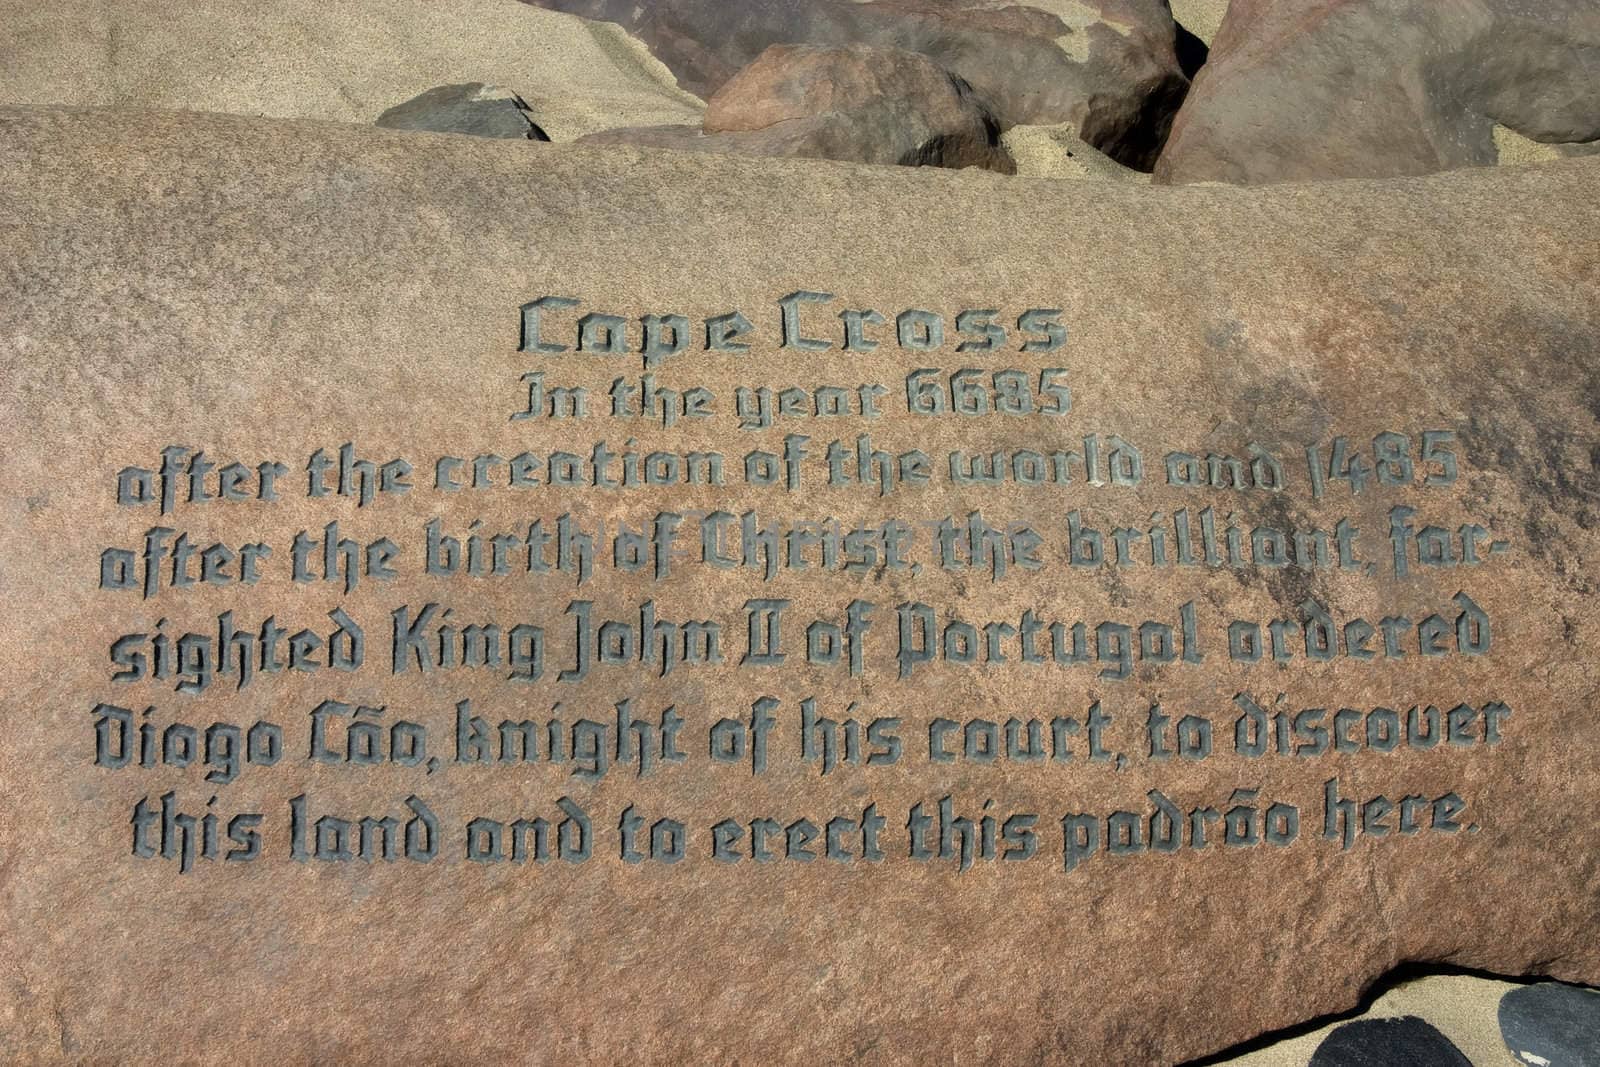 Inscription at Cape Cross on the Skeleton Coast, Namibia, commemorating Diago Cao's discovery of Namibia